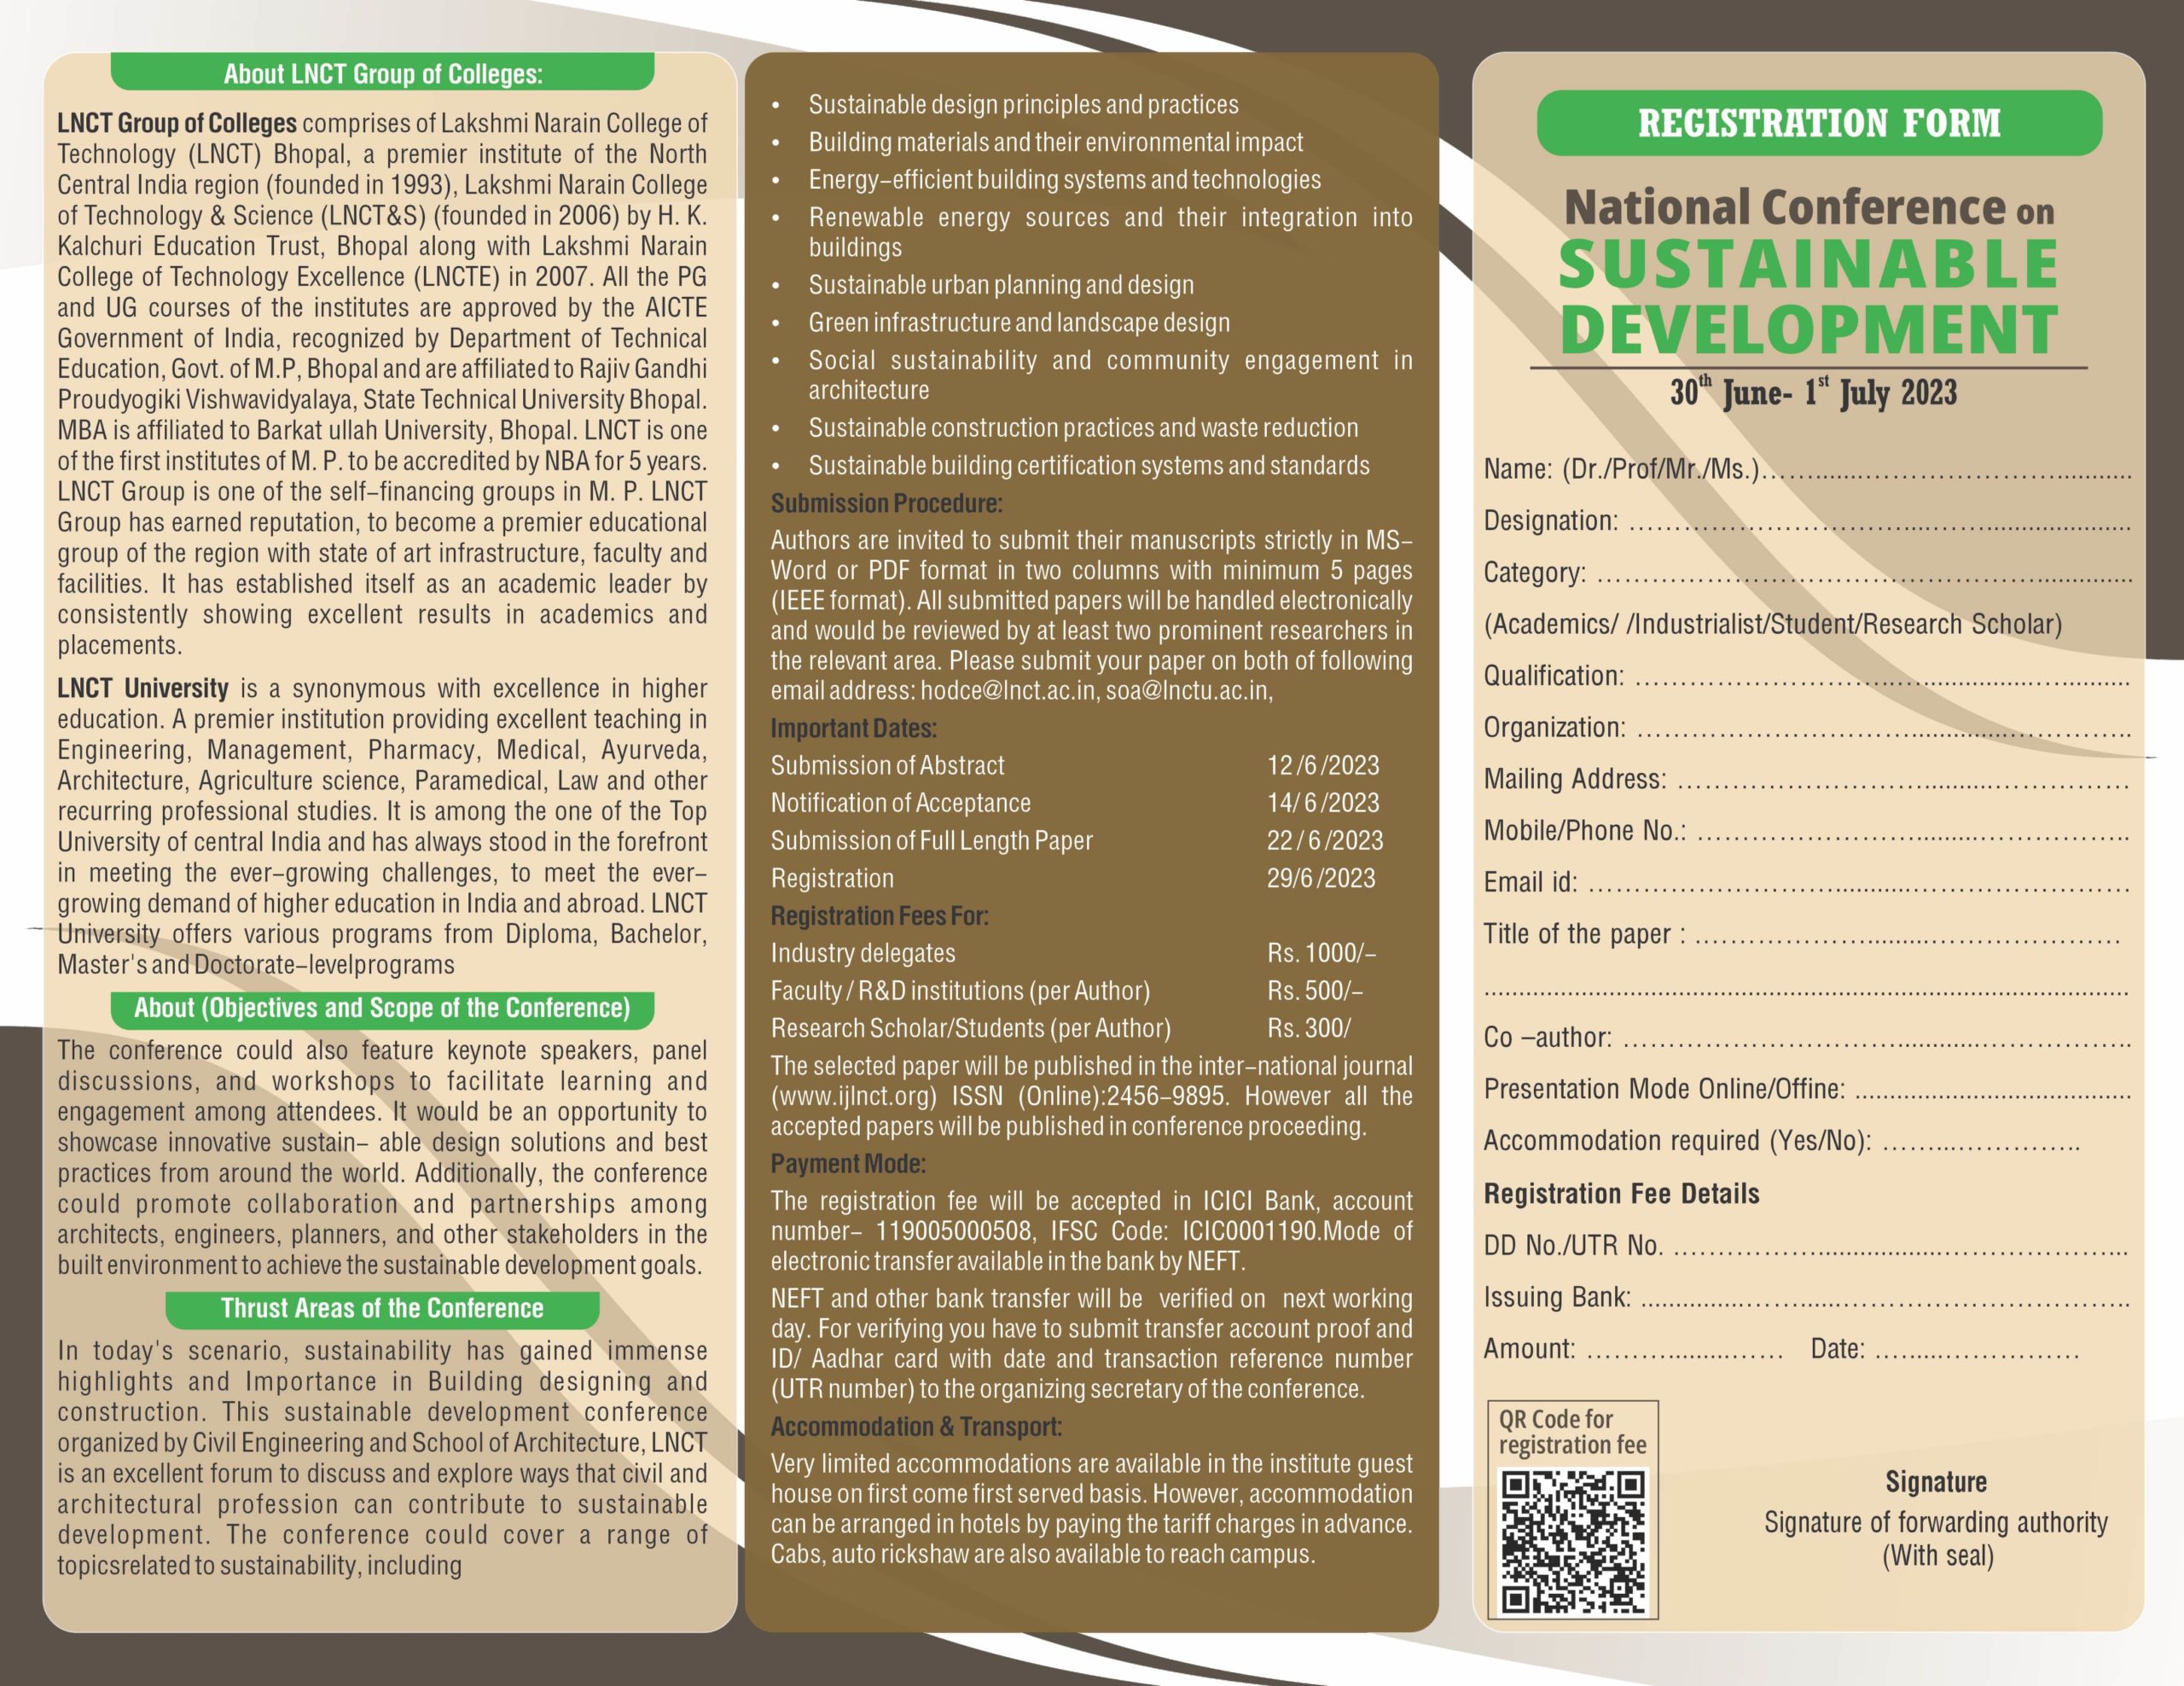 National Conference on Sustainable Development 16